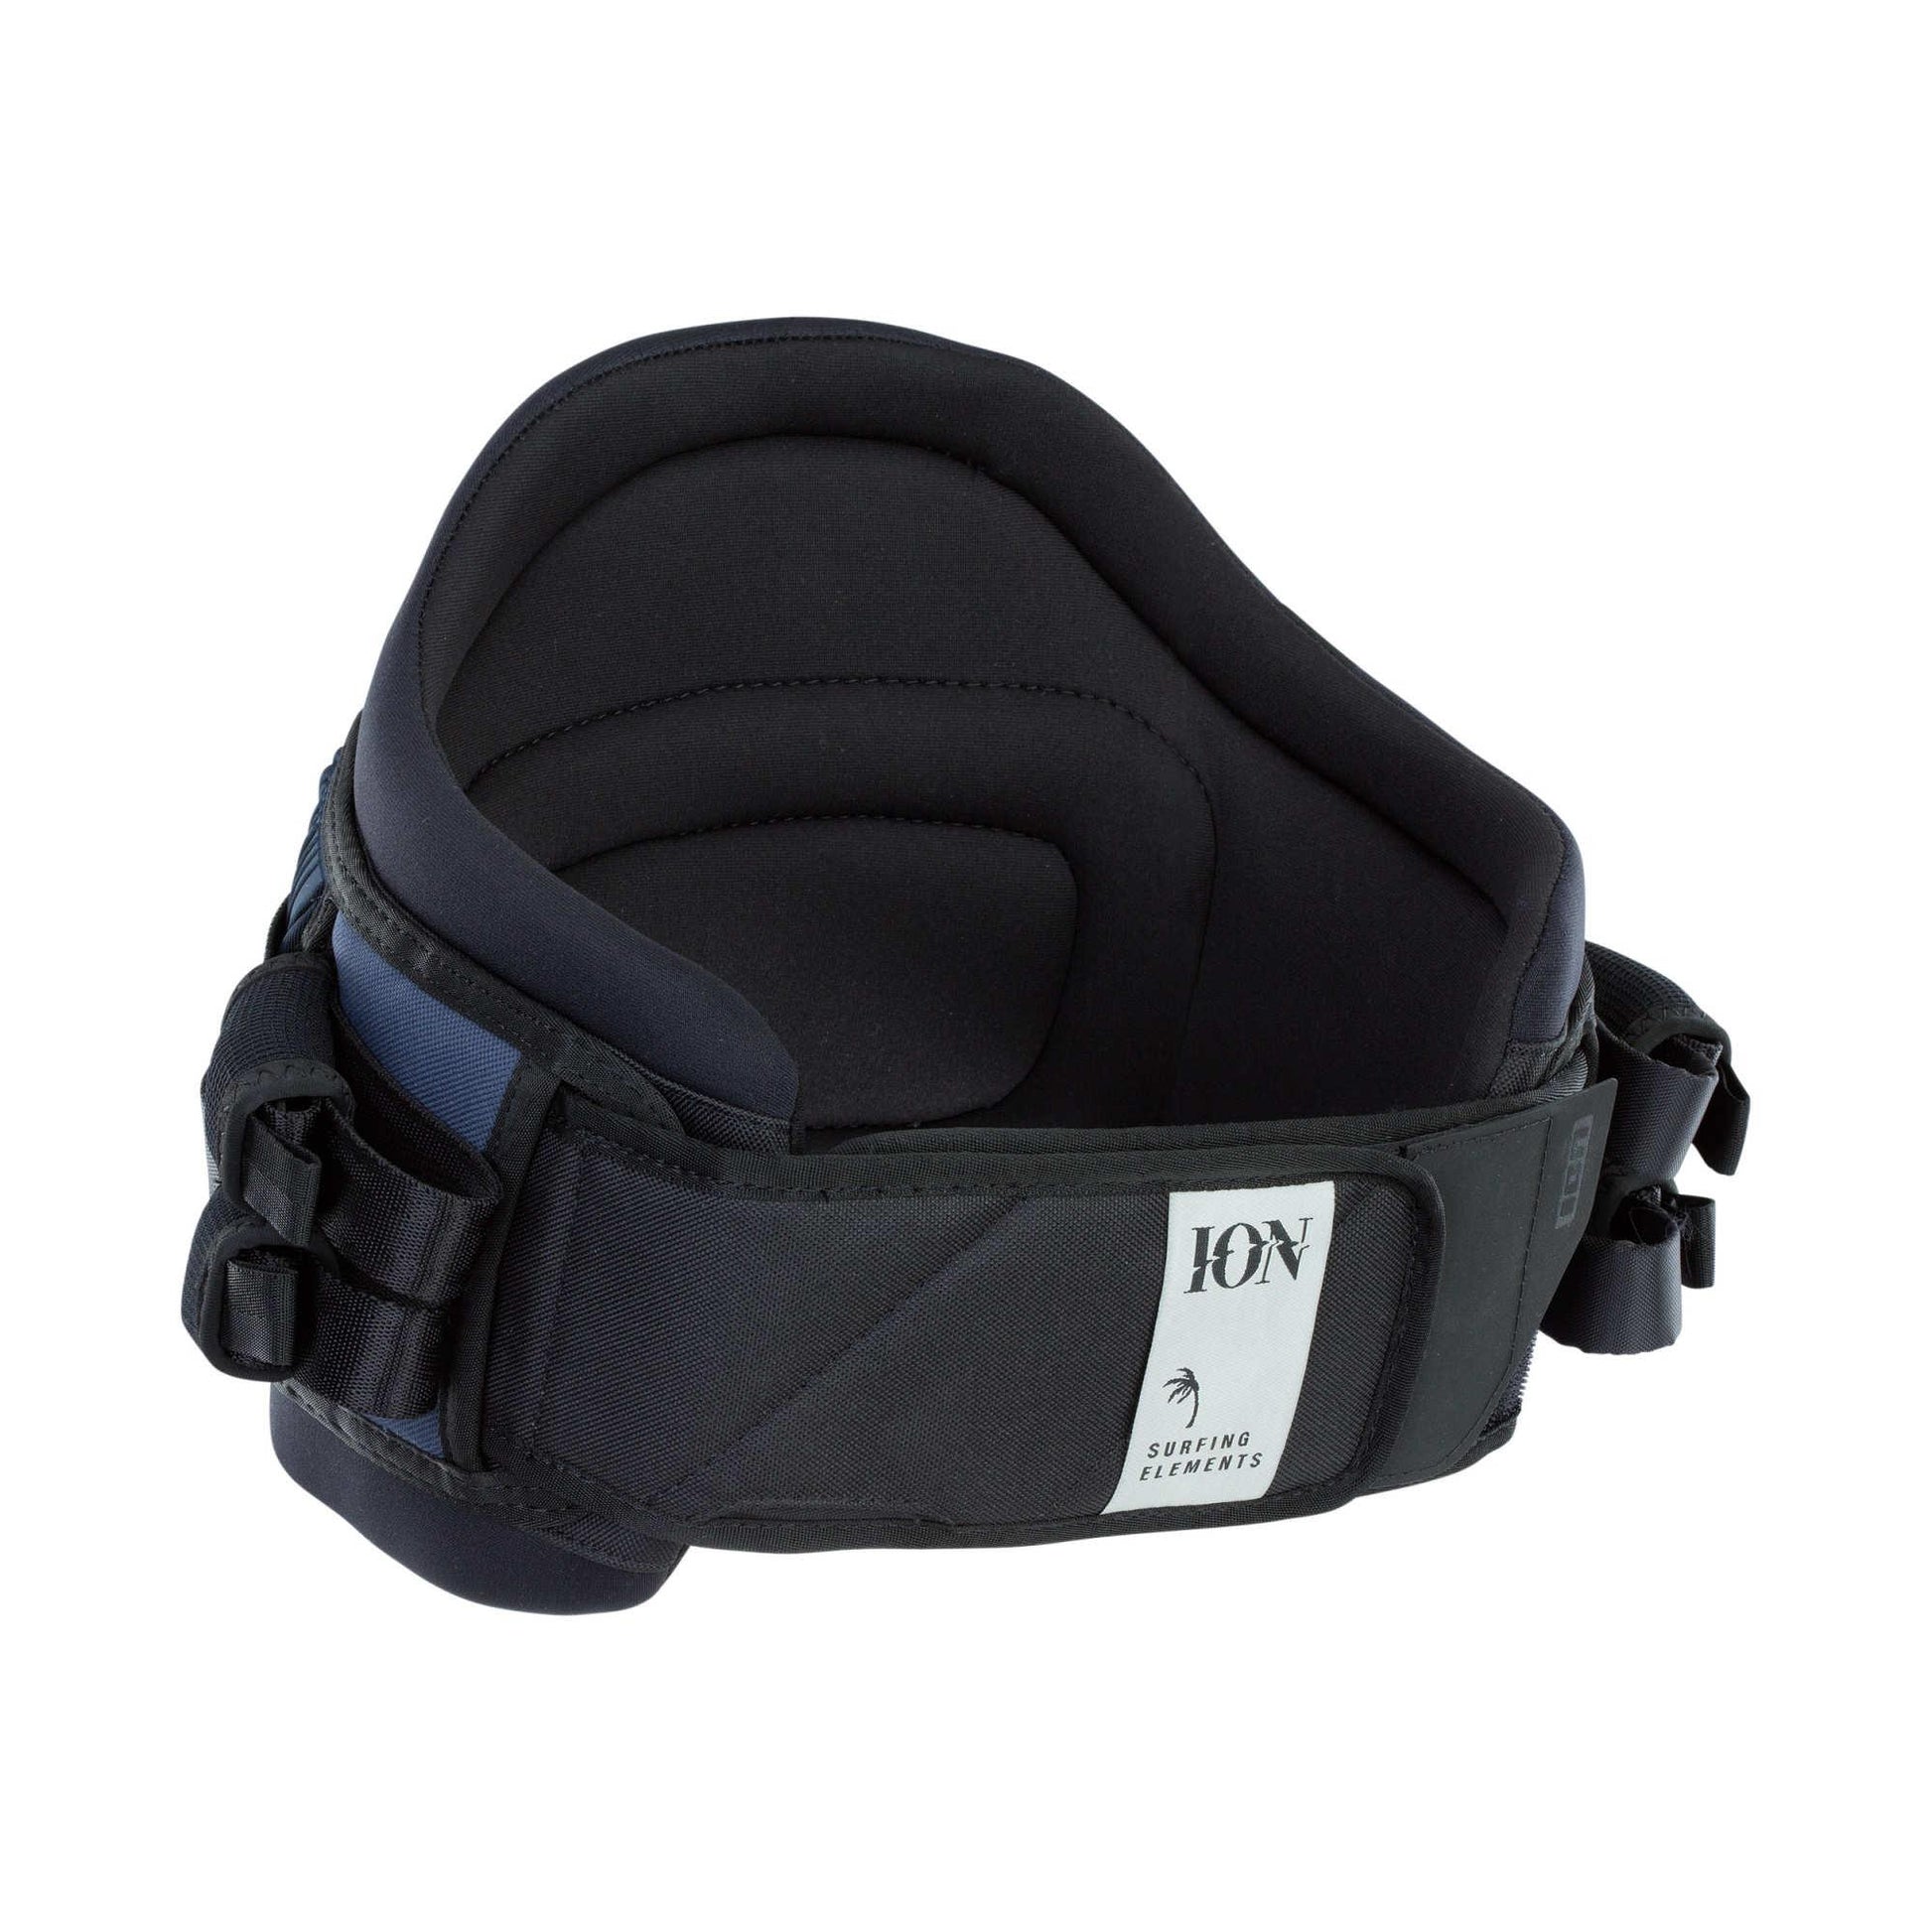 ION Axxis Waist WS Harness 2022 - Poole Harbour Watersports